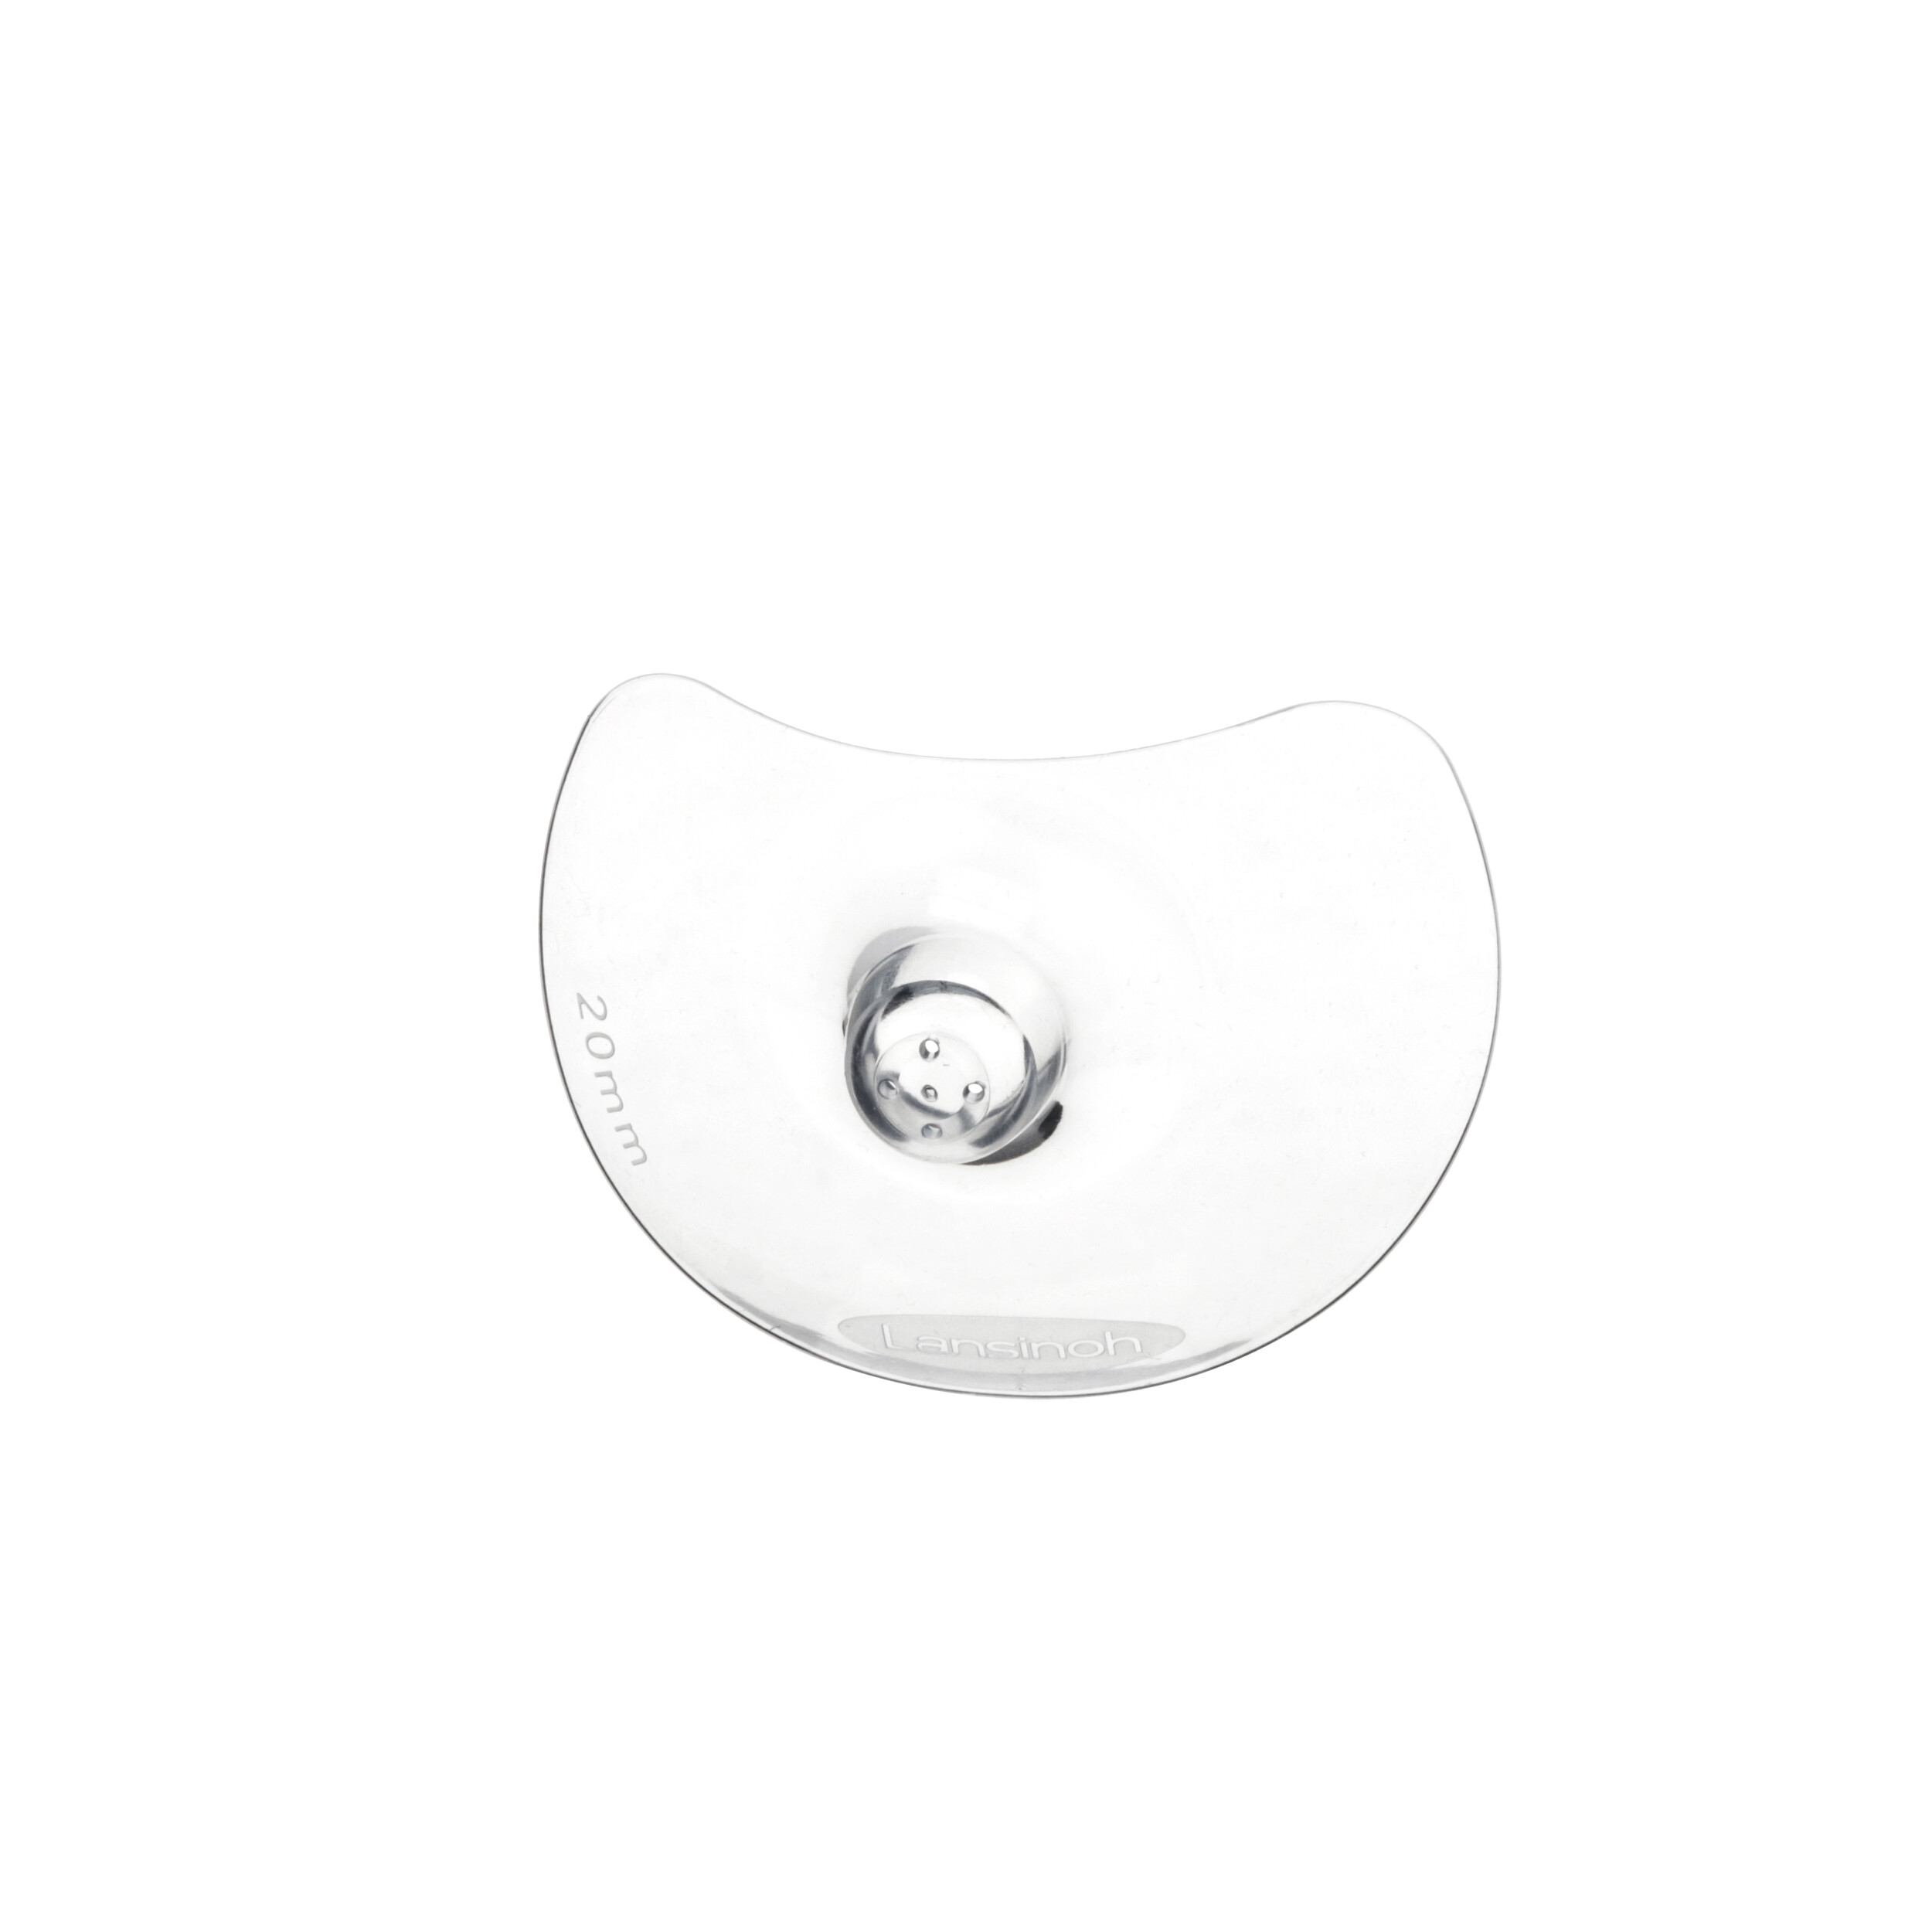 Lansinoh® Contact Nipple Shields (with Case) – Save Rite Medical